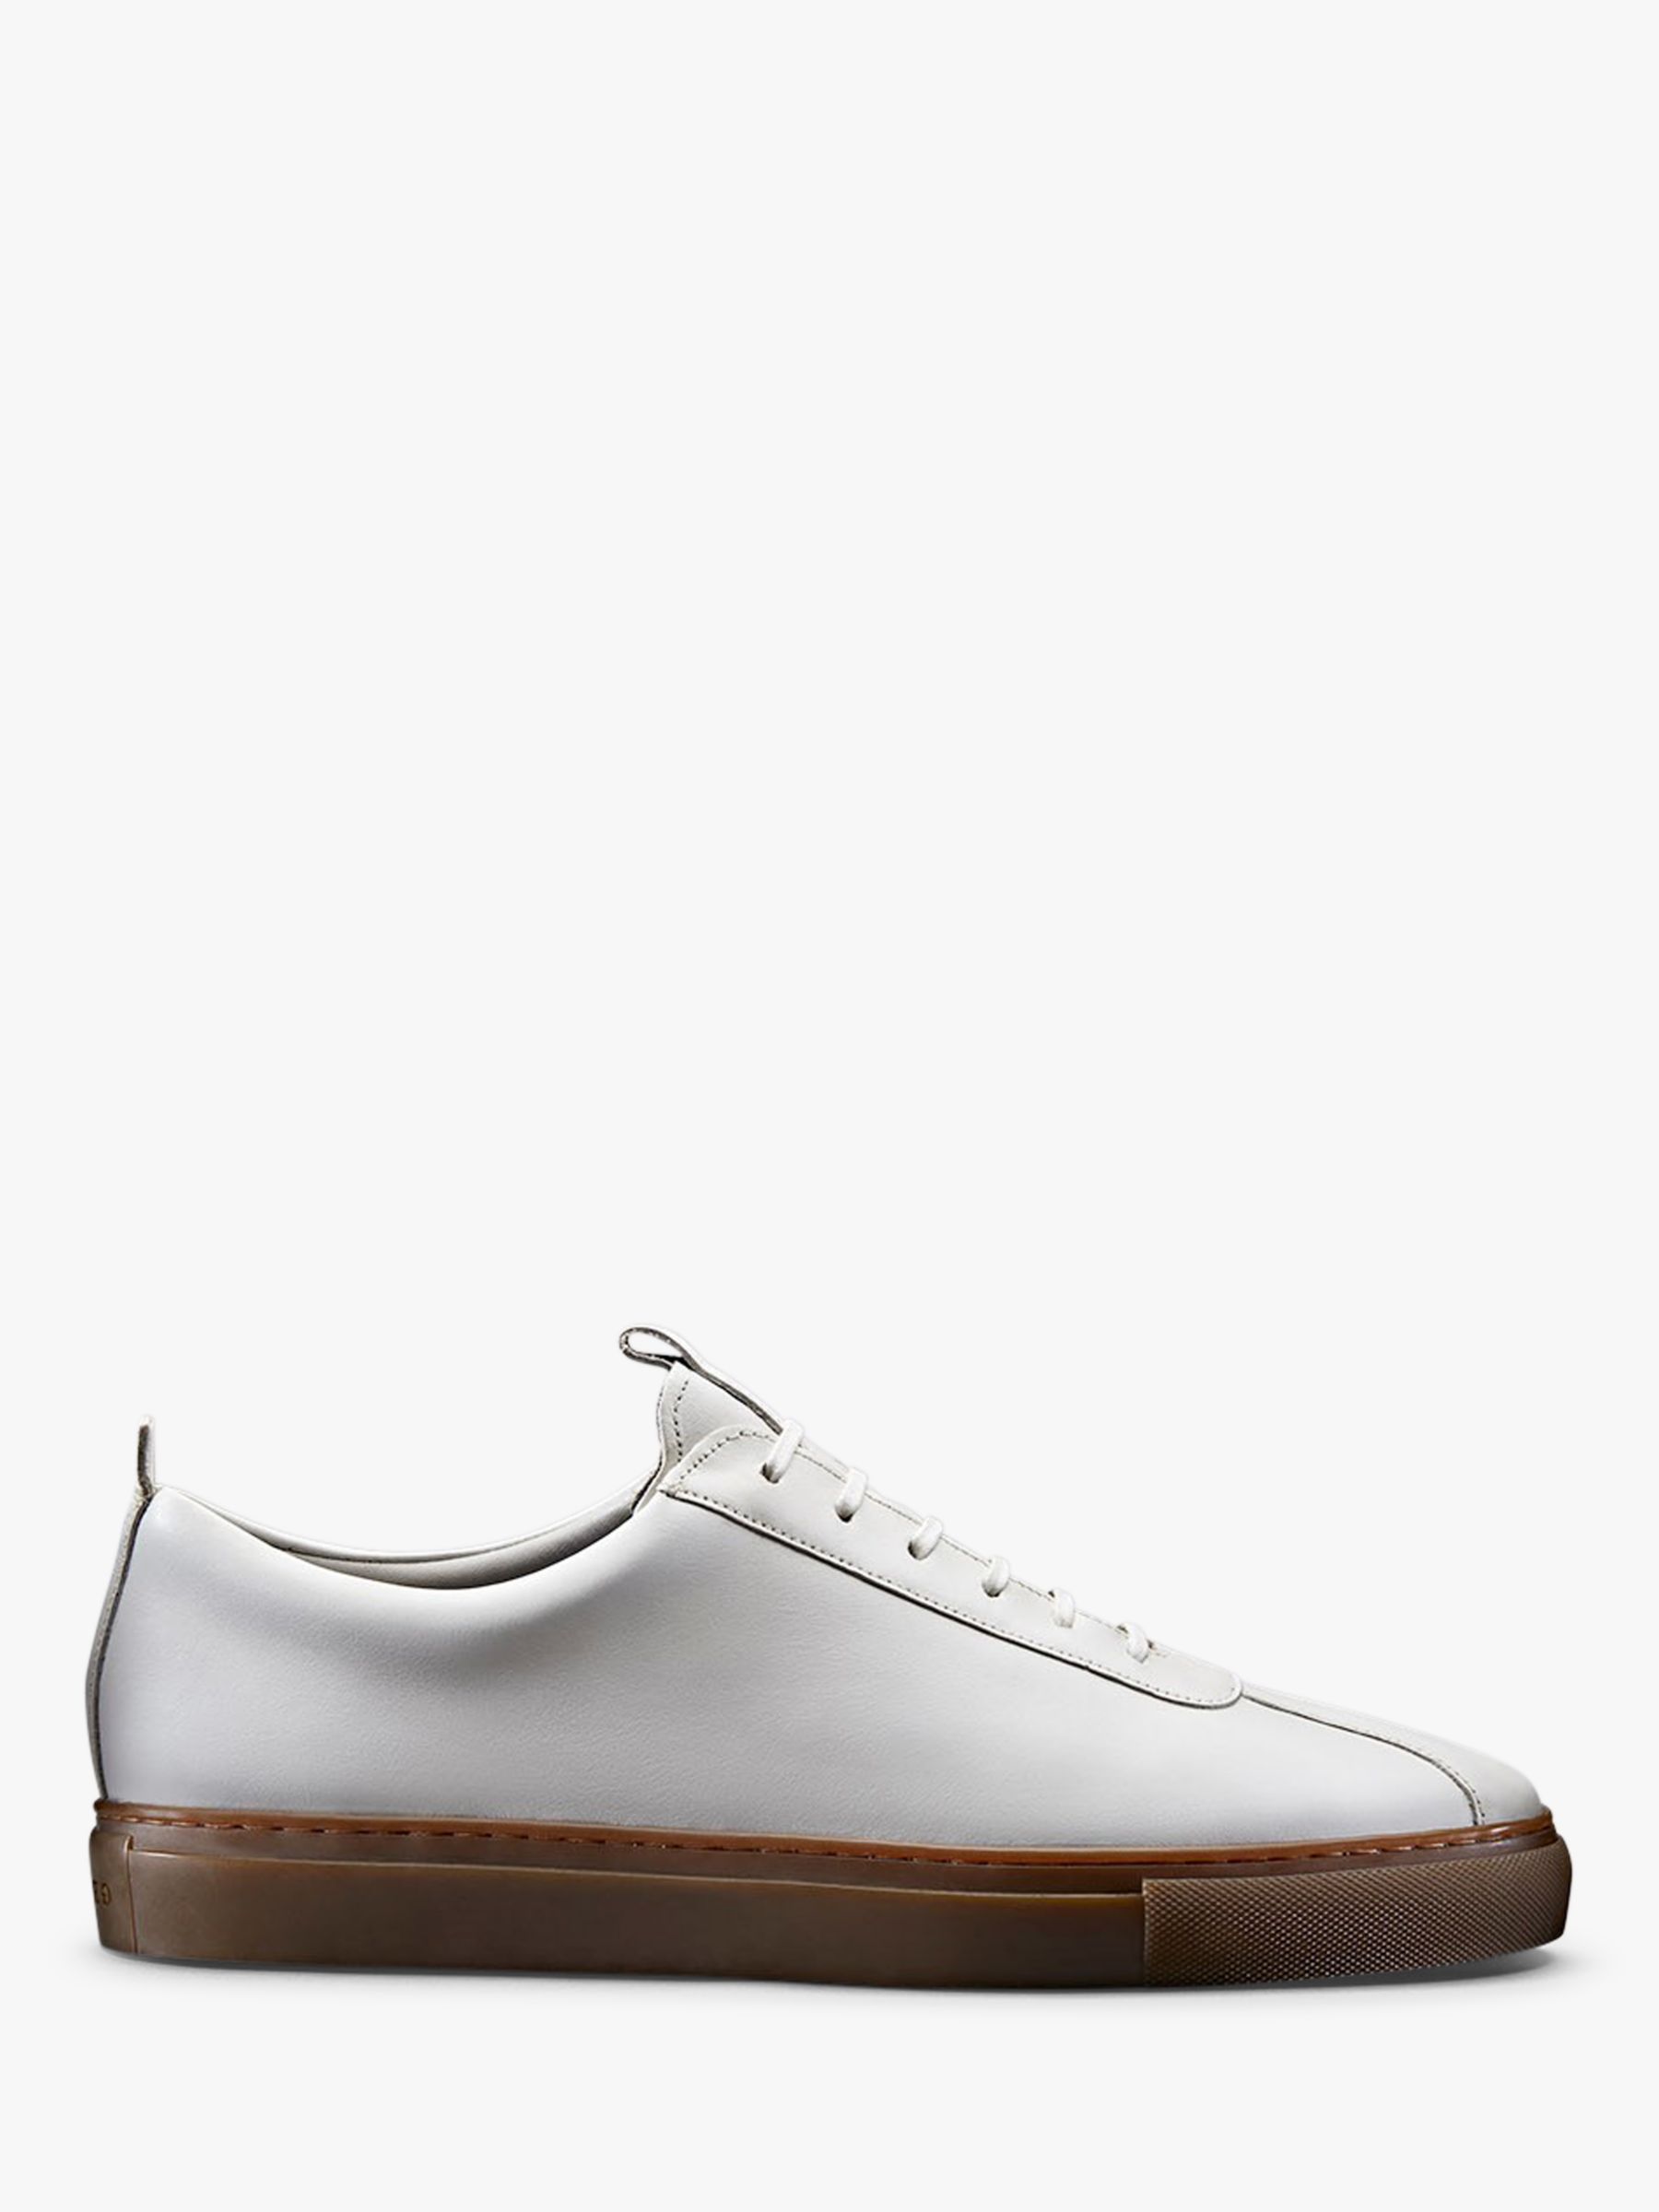 Grenson Sneaker 1 Trainers, White at 